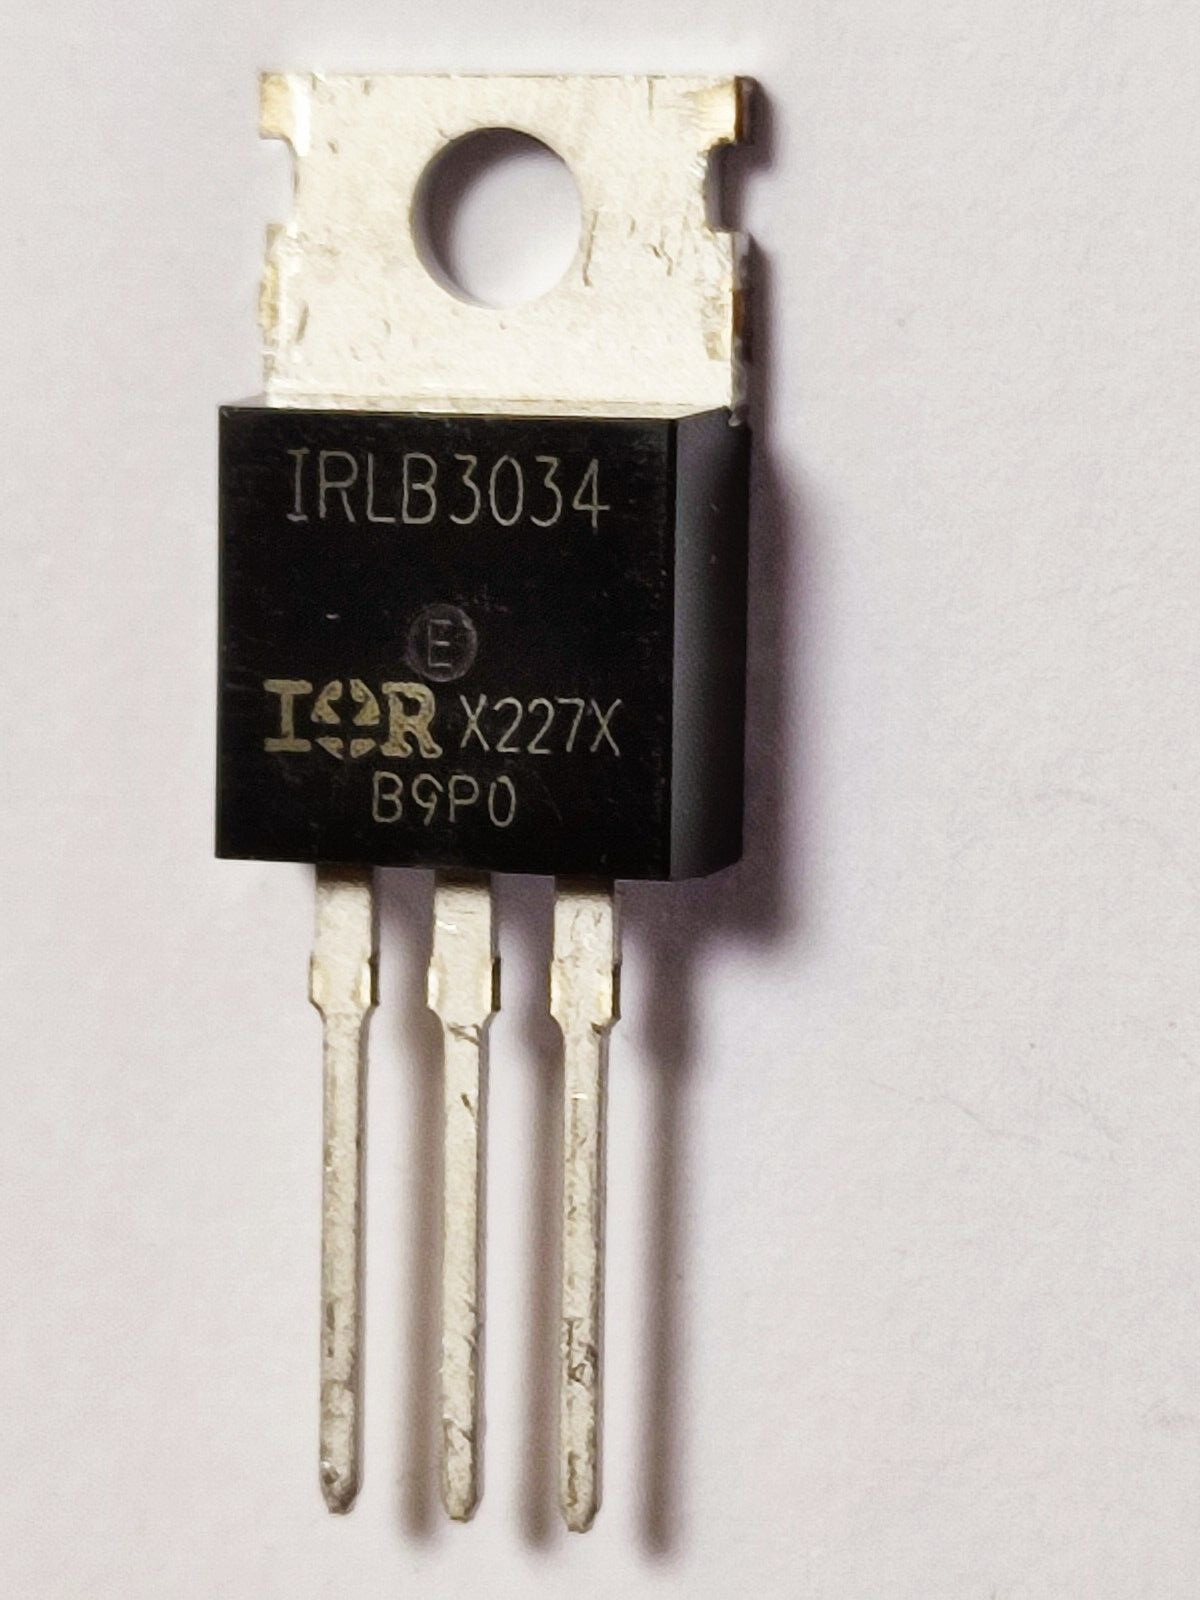 2Pcs.  IRLB3034 HEXFET Power MOSFET, 40V 195A 375W TO220AB